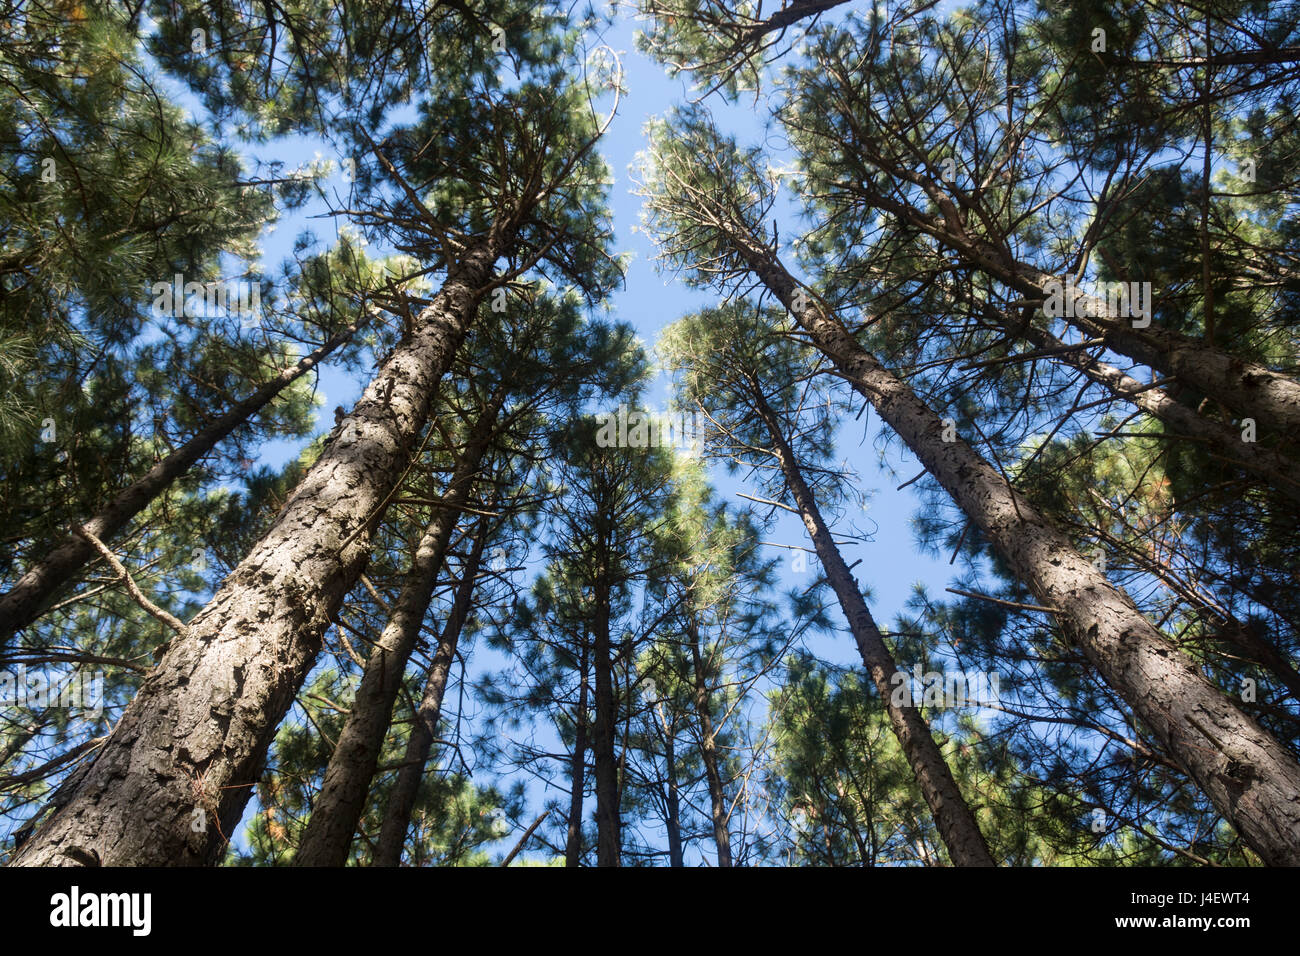 Looking up at pine trees Stock Photo